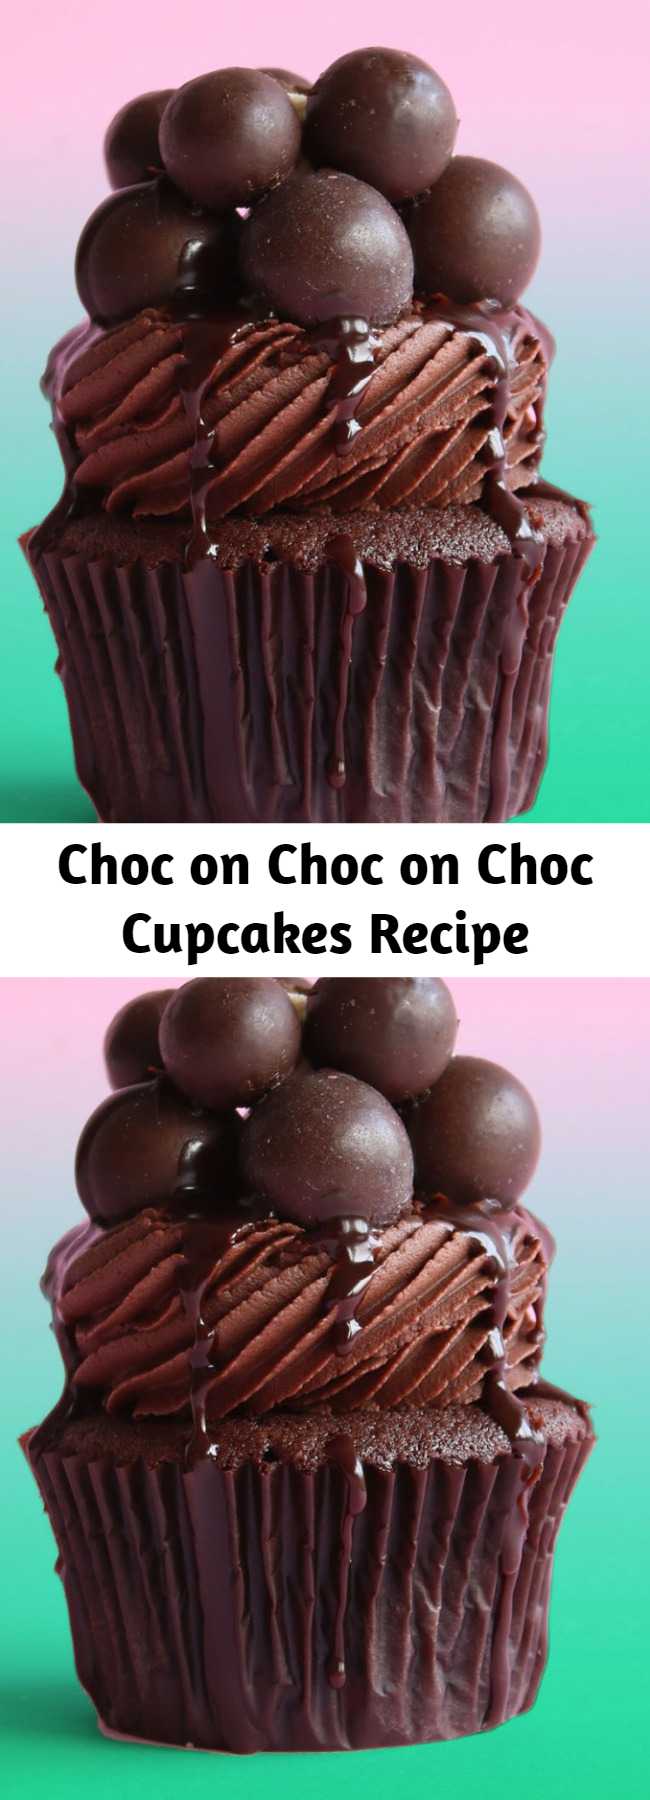 Choc on Choc on Choc Cupcakes Recipe - There's so much chocolate happening here it could be a crime, but thank heavens it's not.